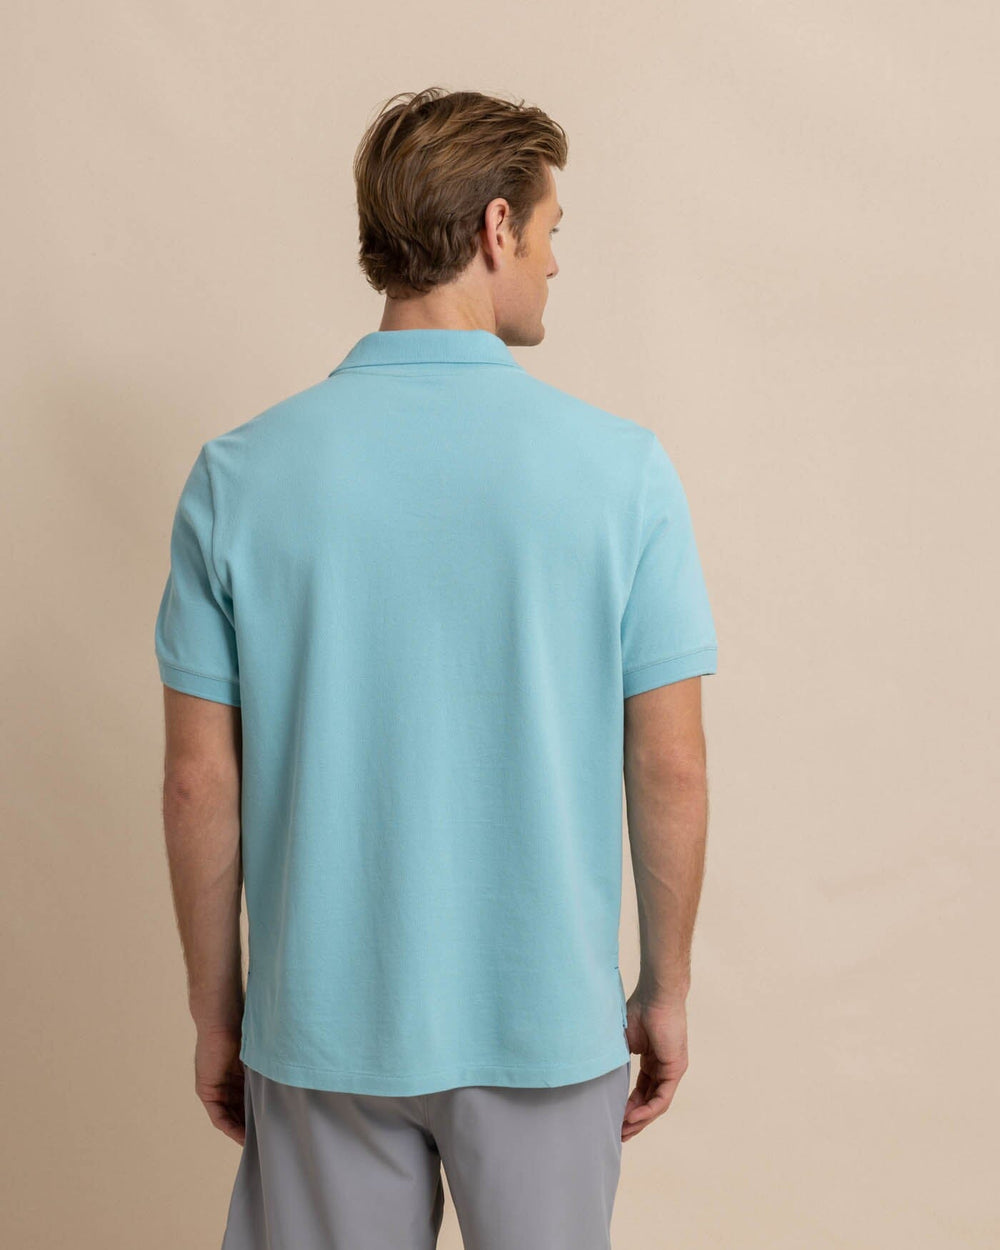 The back view of the Southern Tide new-skipjack-polo-shirt by Southern Tide - Marine Blue